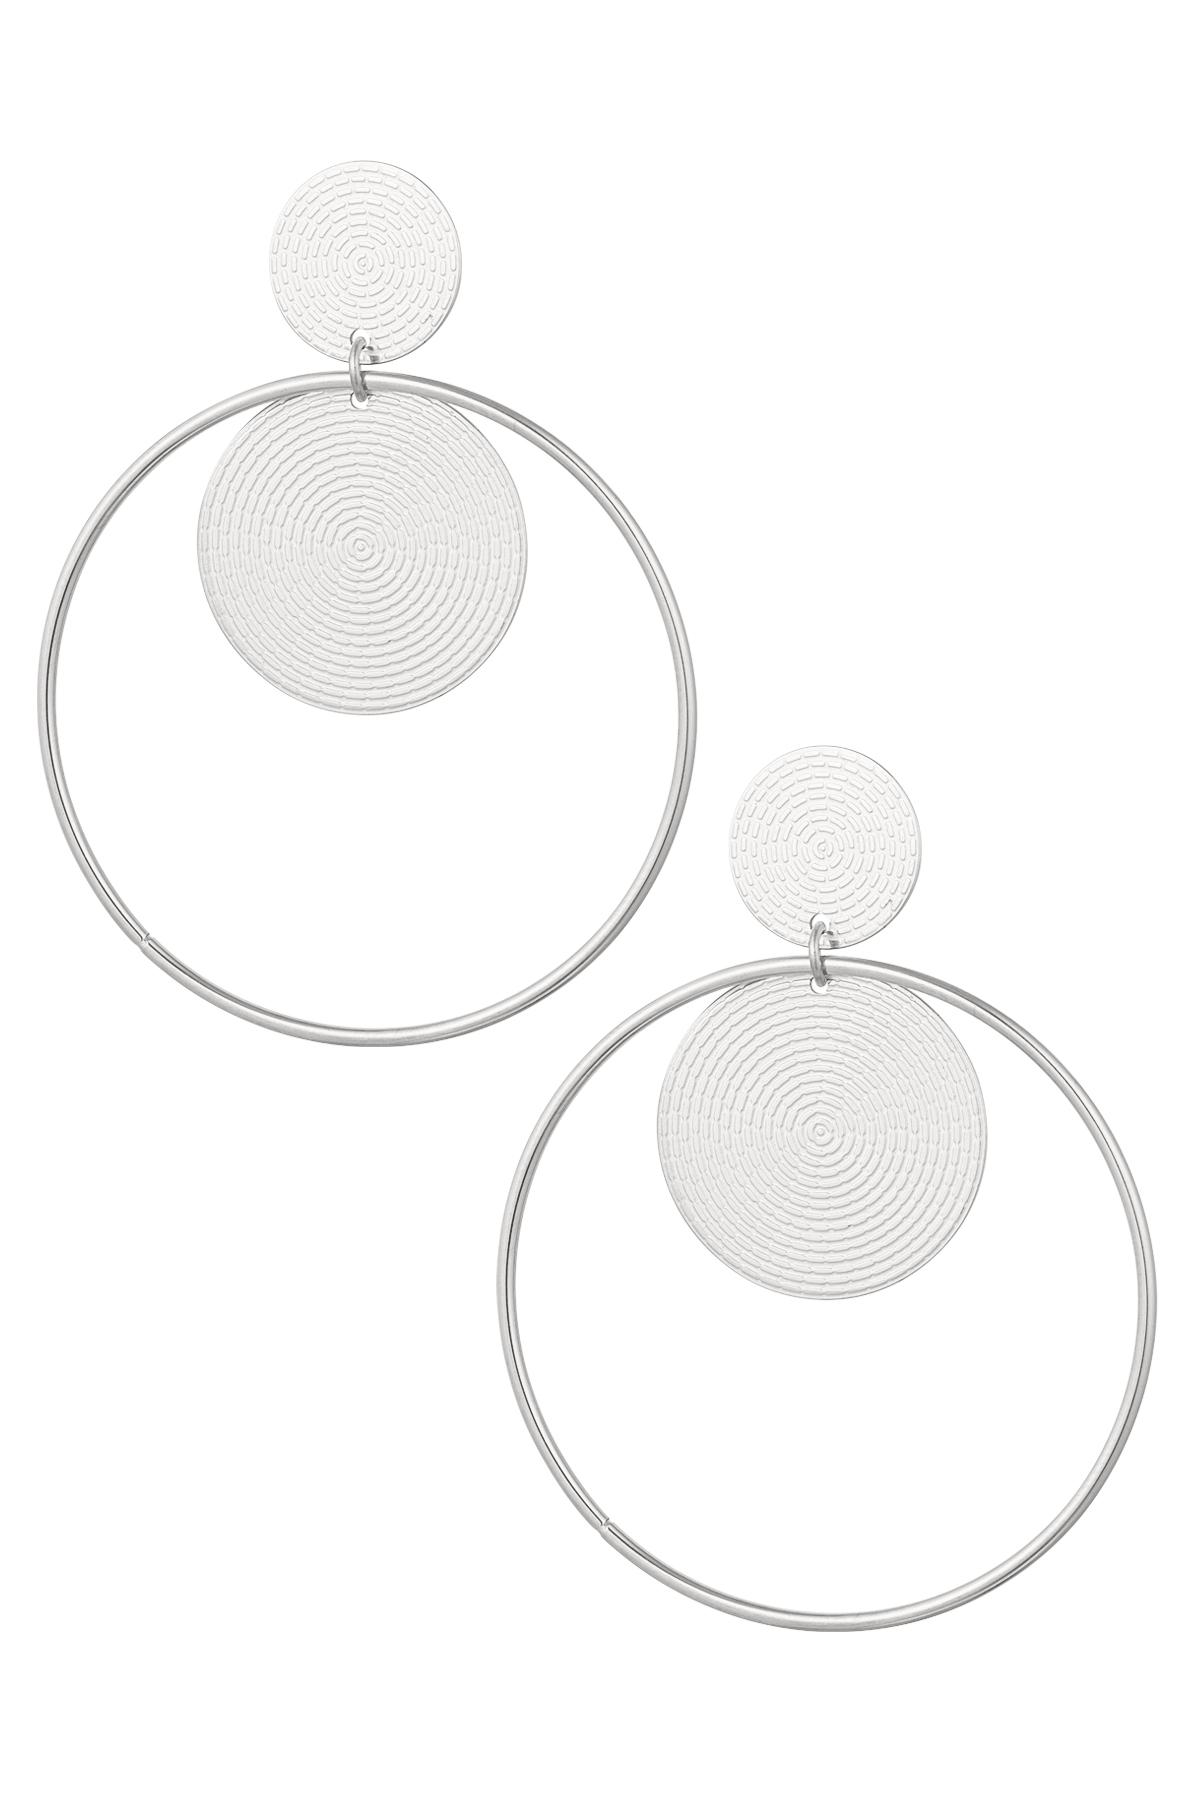 Earrings round & round - silver Stainless Steel 